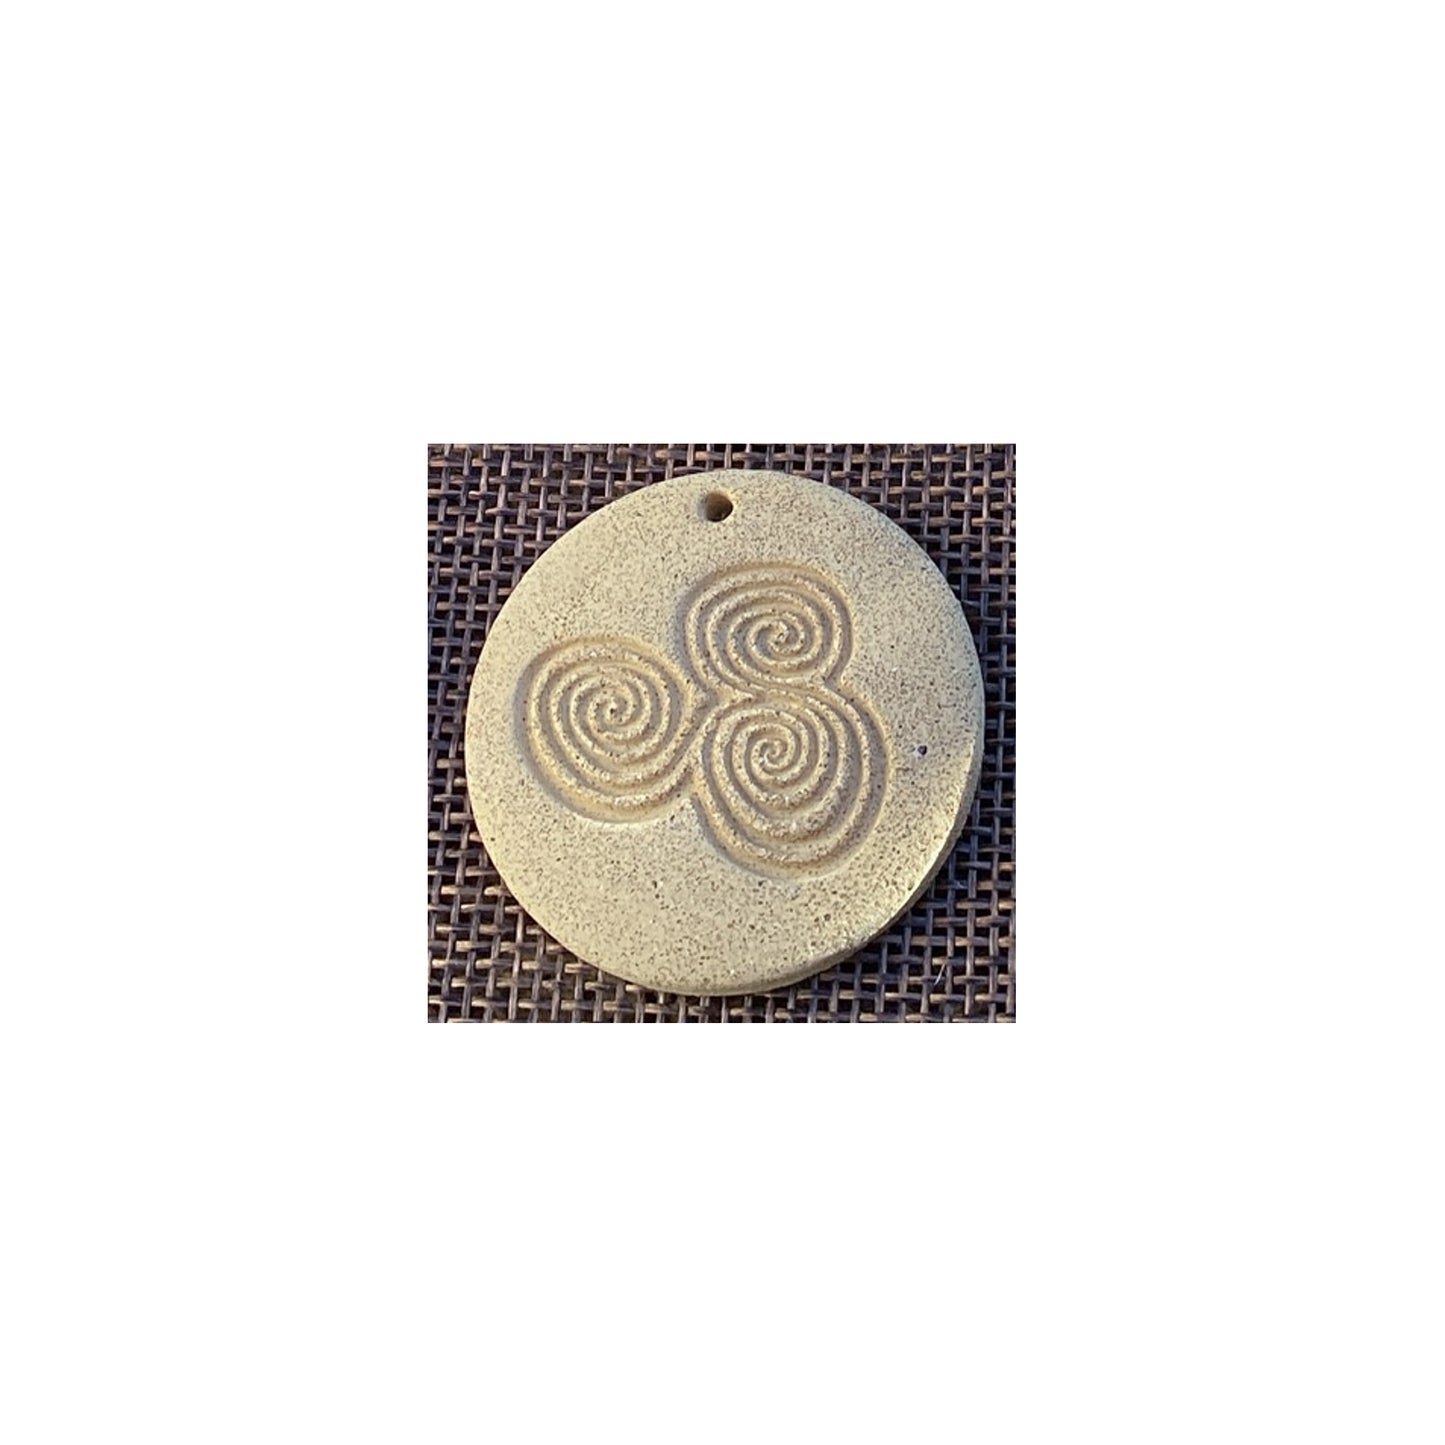 Megalithic Art Pendant with Triskele Design.